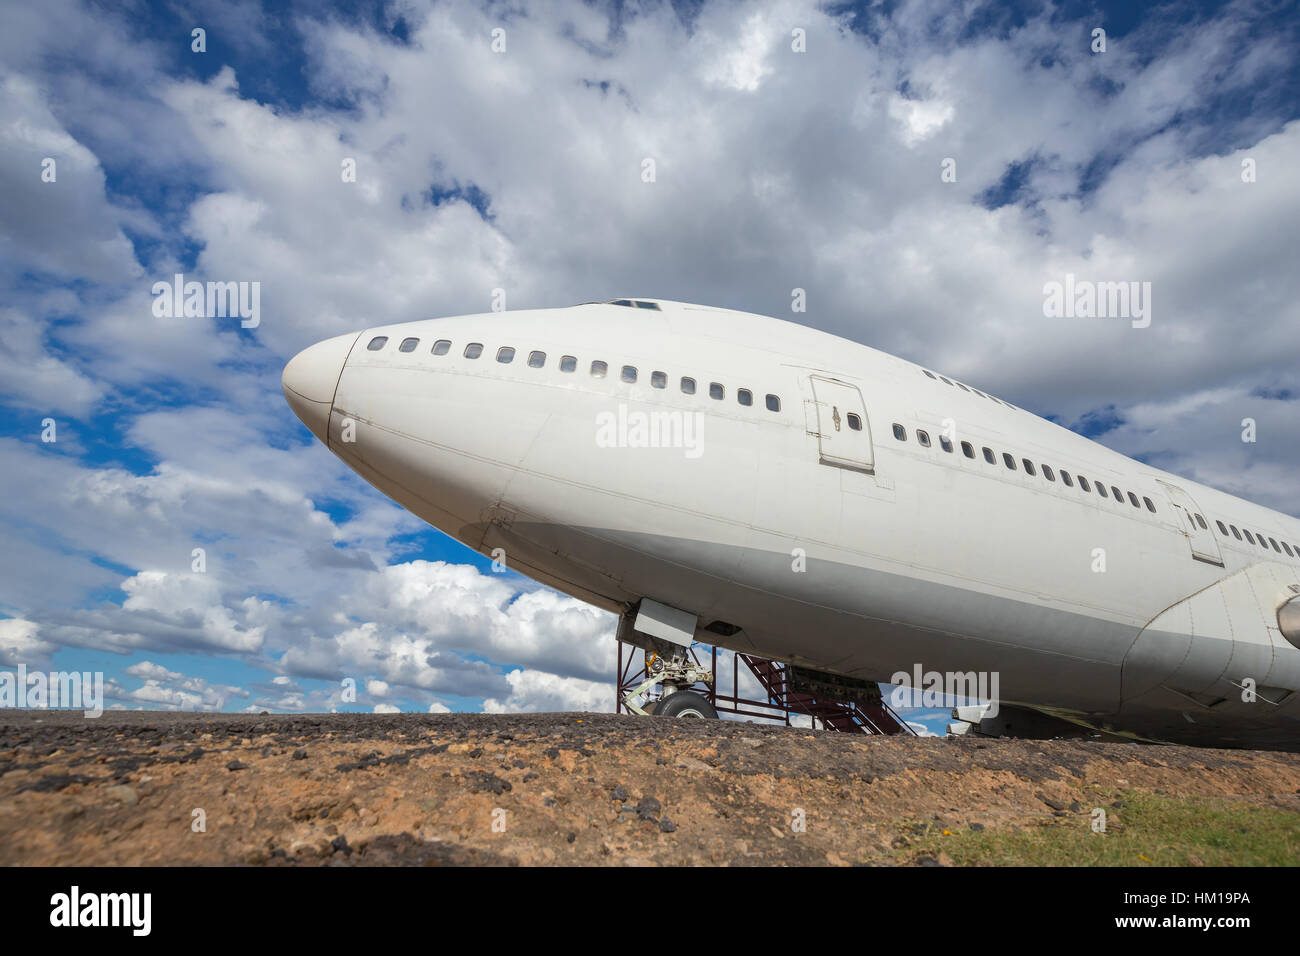 Big head plane on runways with cloud and blue sky background Stock Photo